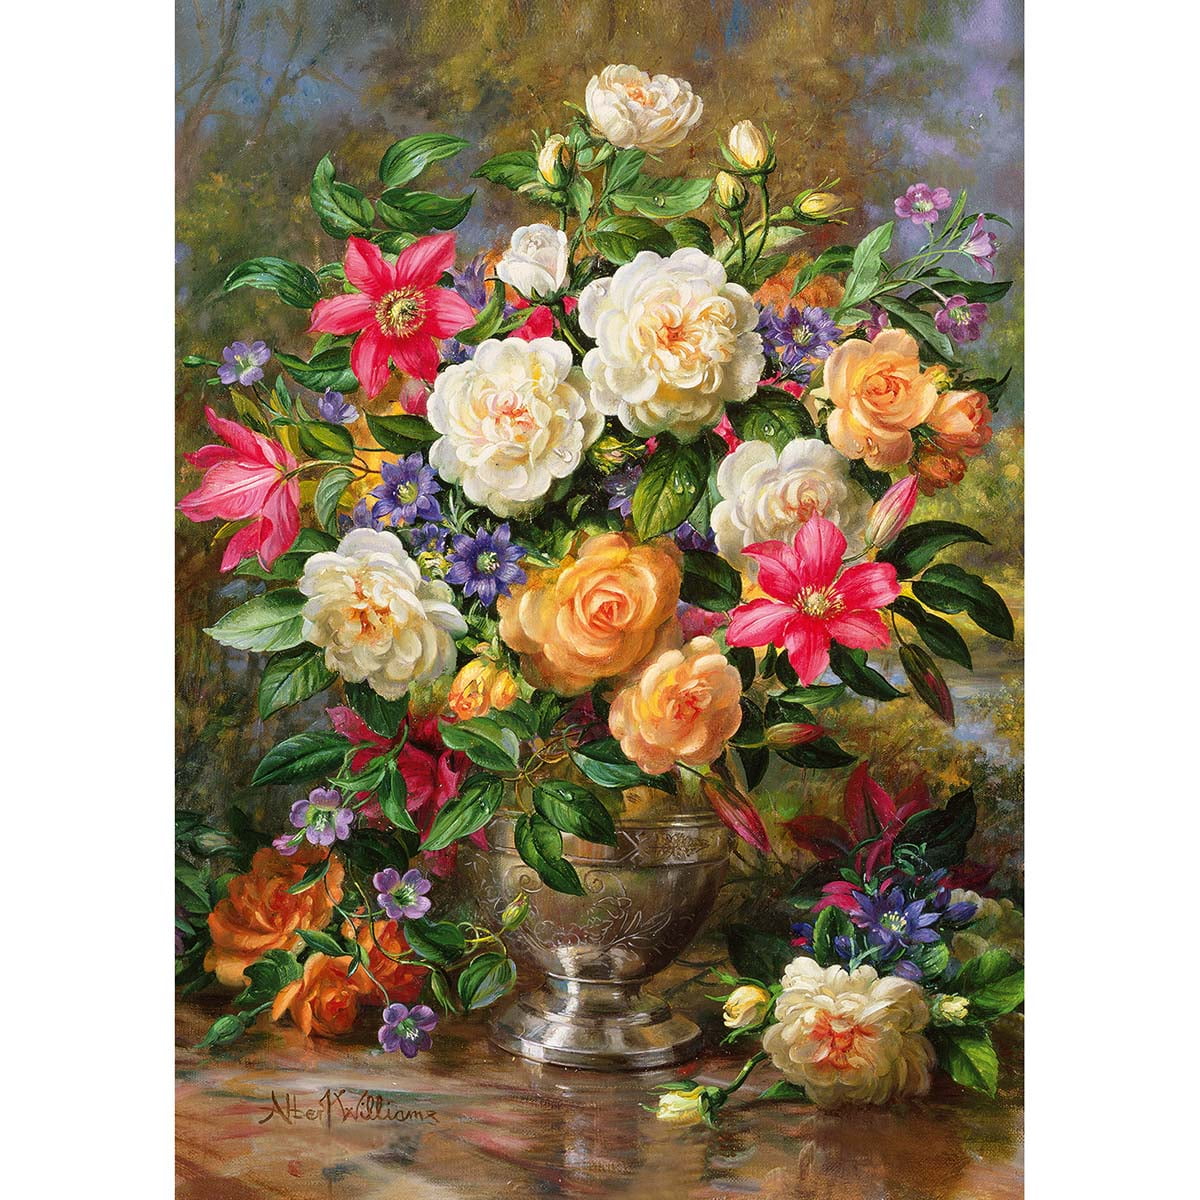 Flowers Puzzle Jigsaw Puzzles 4000 Piece Puzzles for Adults Educational Games Home Decoration Jigsaw Puzzles for Adults Kids 